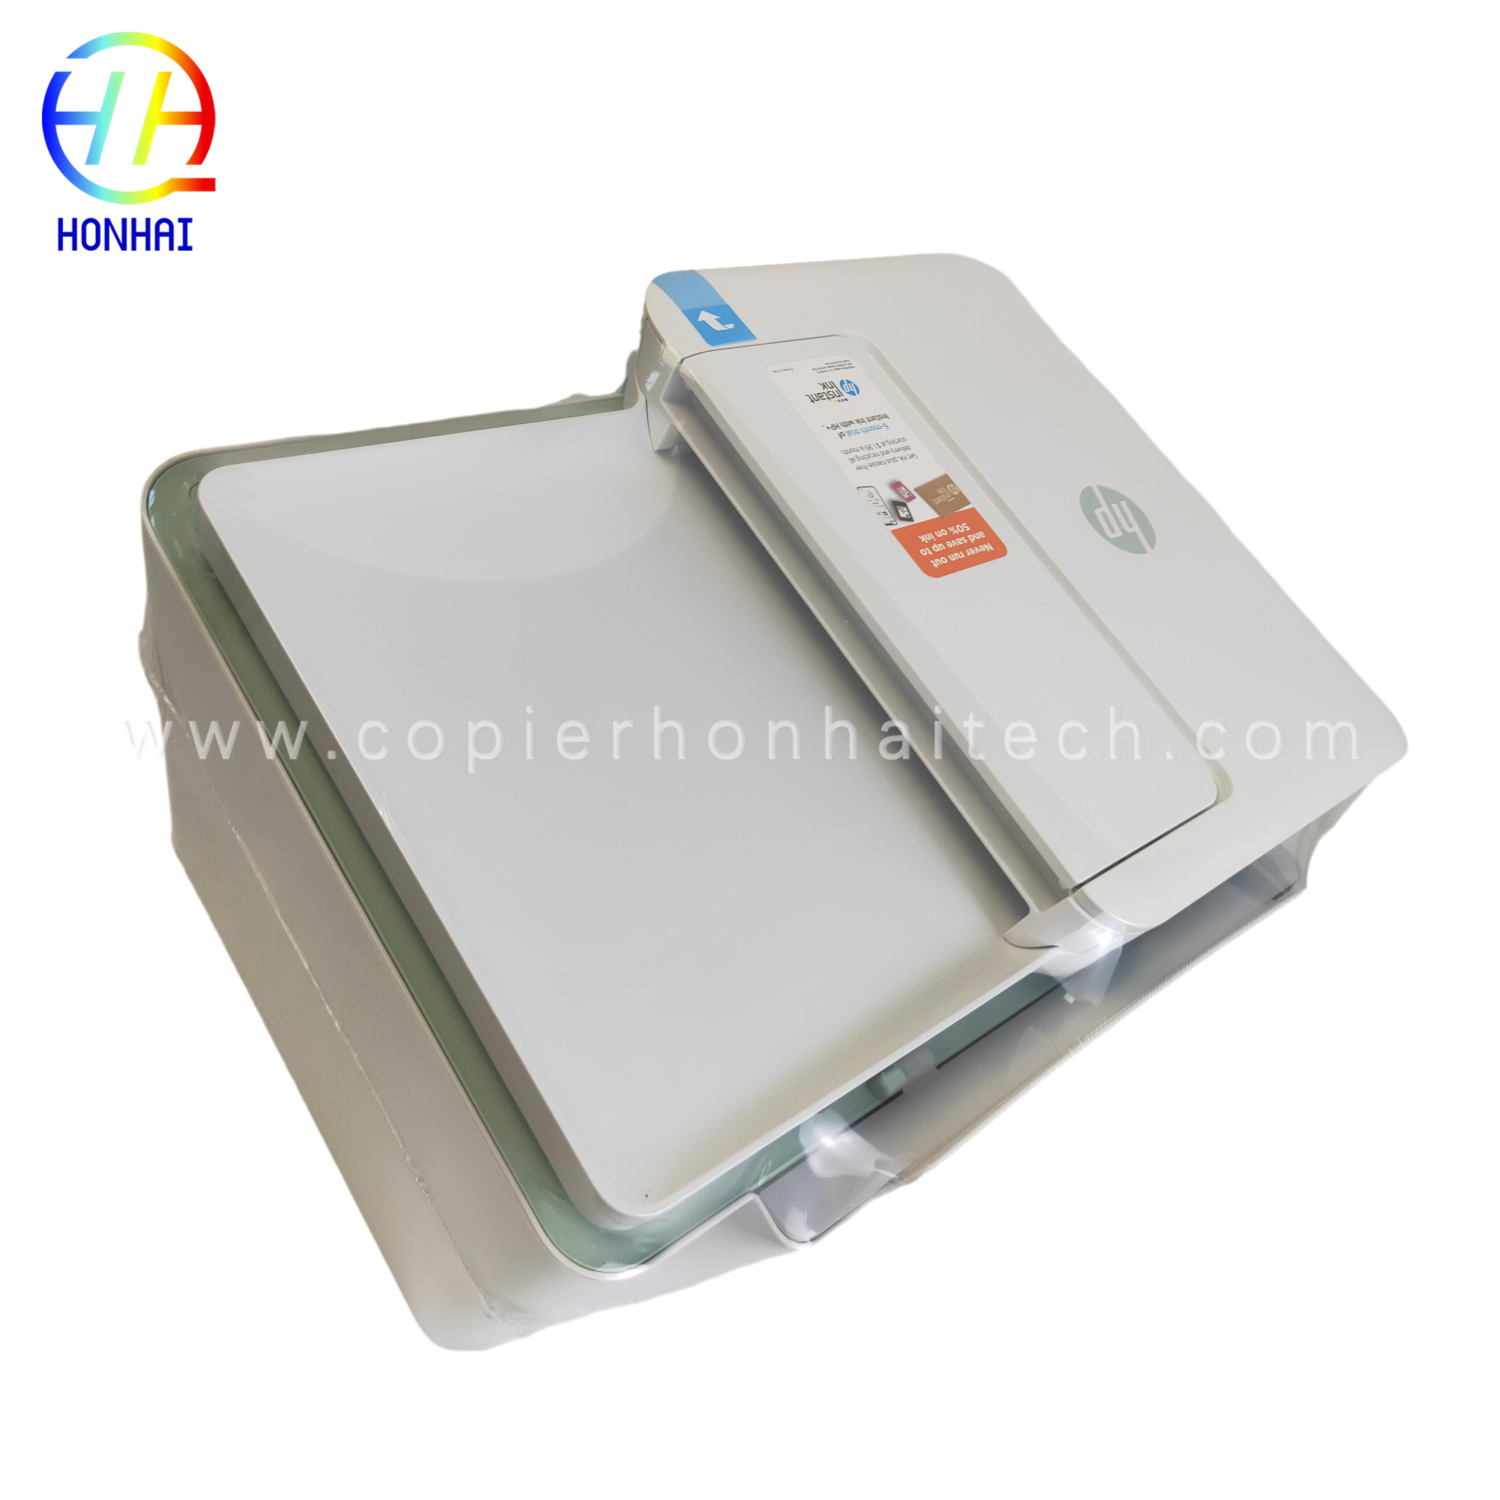 https://www.copierhonhaitech.com/original-new-wireless-printer-for-hp-deskjet-4122e-all-in-one-printer-scan-and-copy-home-office-students-and-home- پرنٹر-26q96a-پروڈکٹ/